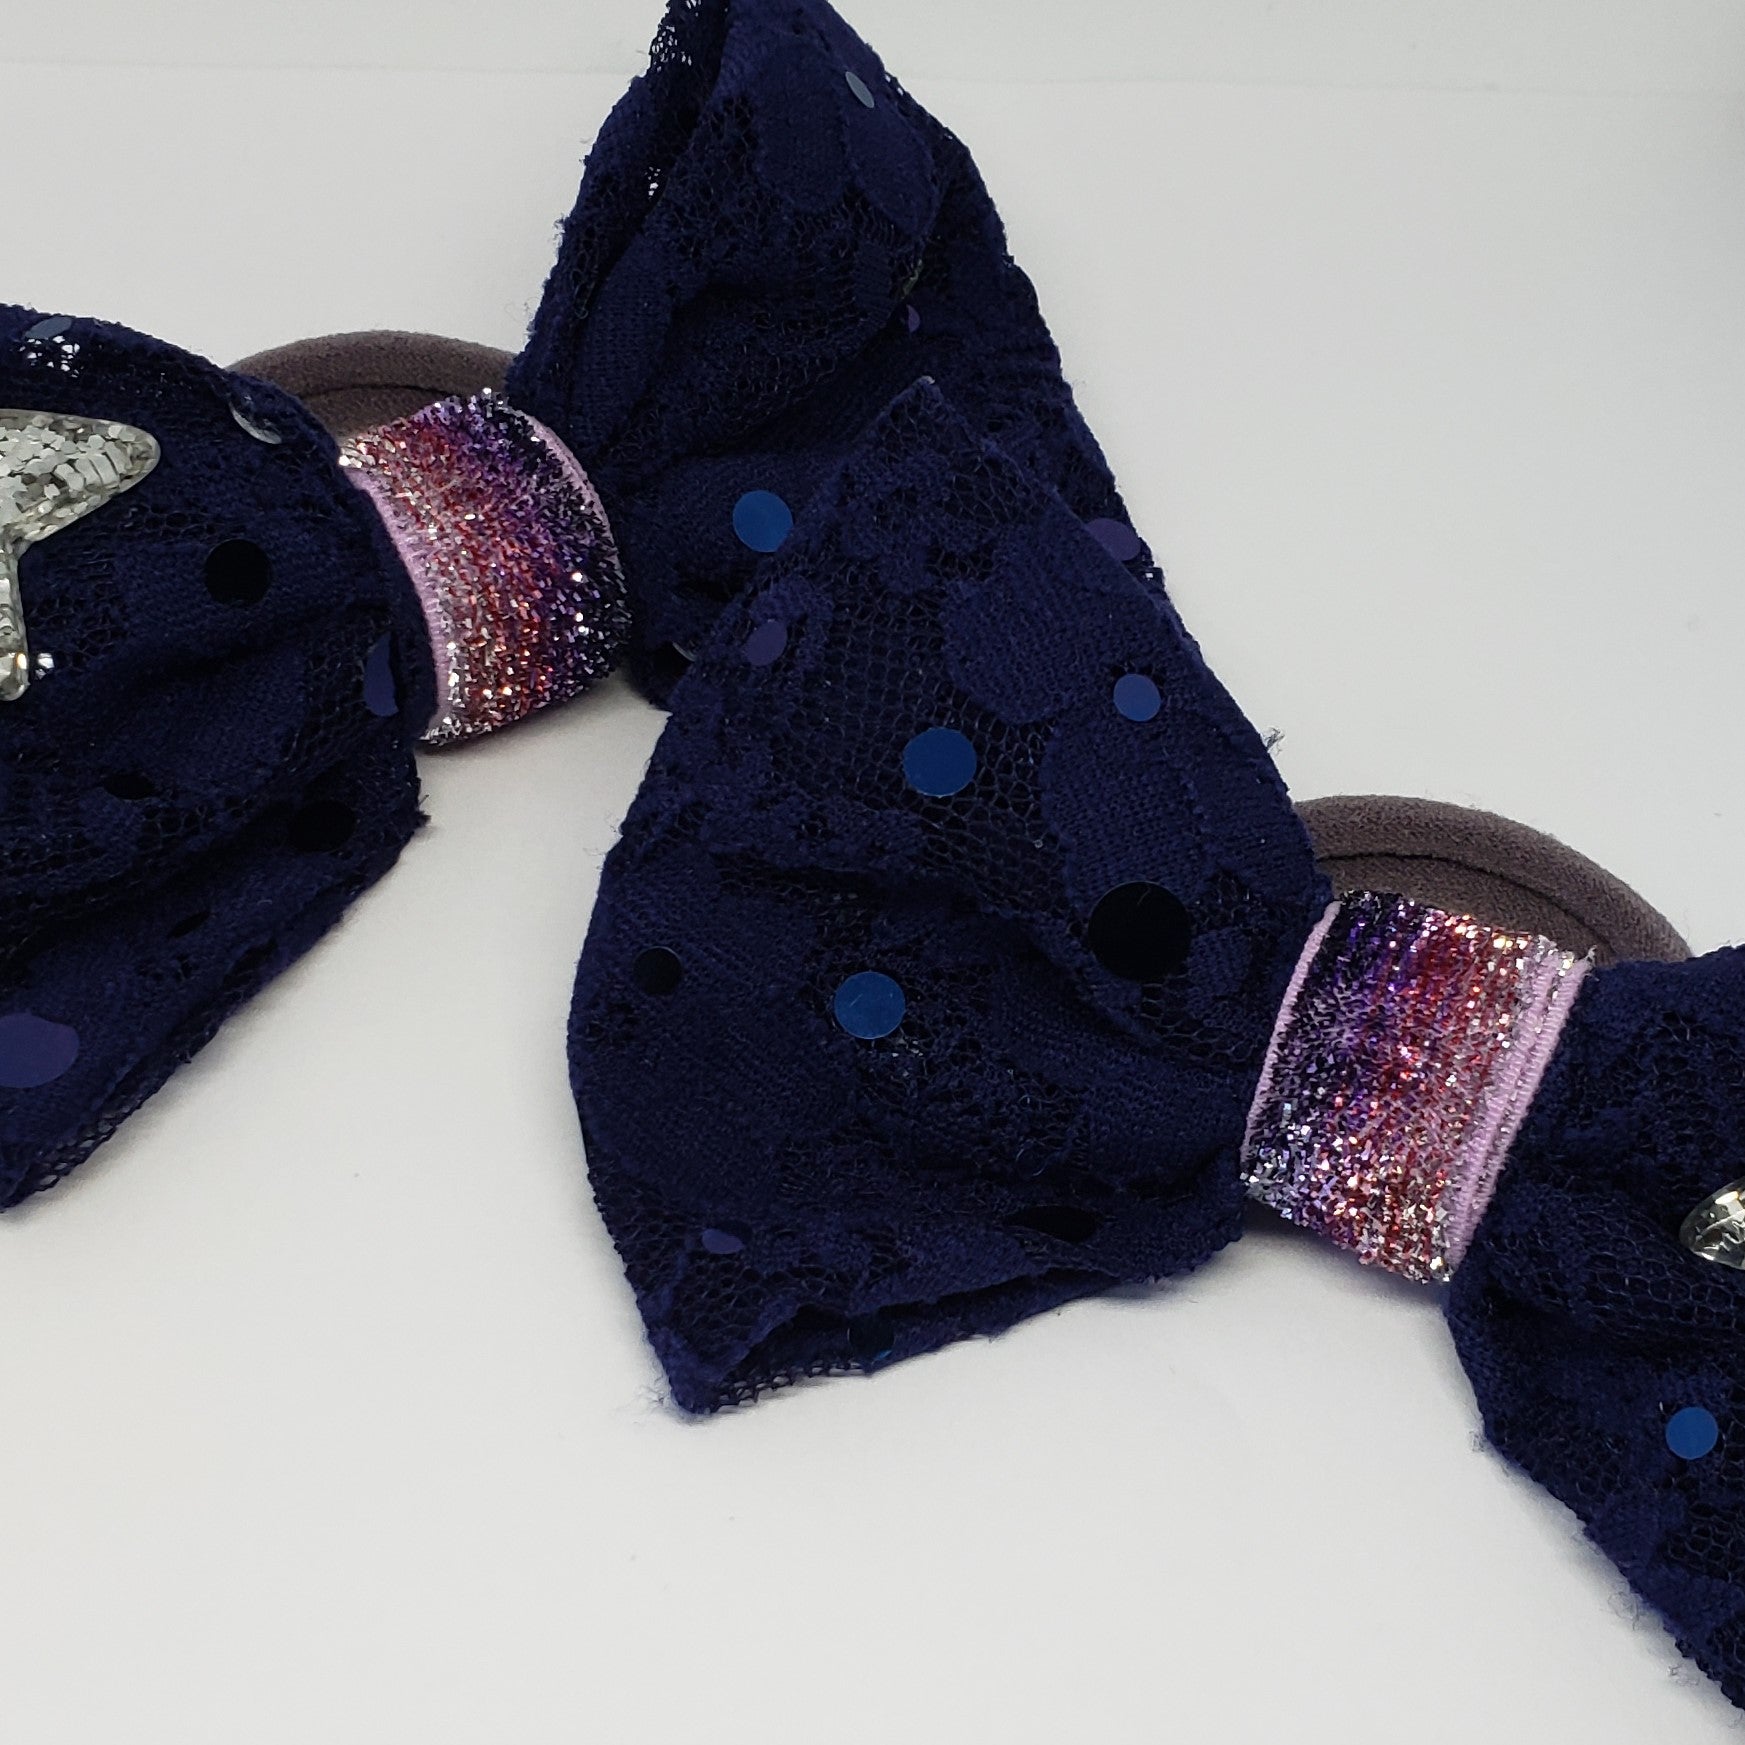 Sophia-Lynn Starry Night Navy Sequin Lace & Sparkling Lavender Hair Bow - Houzz of DVA Boutique